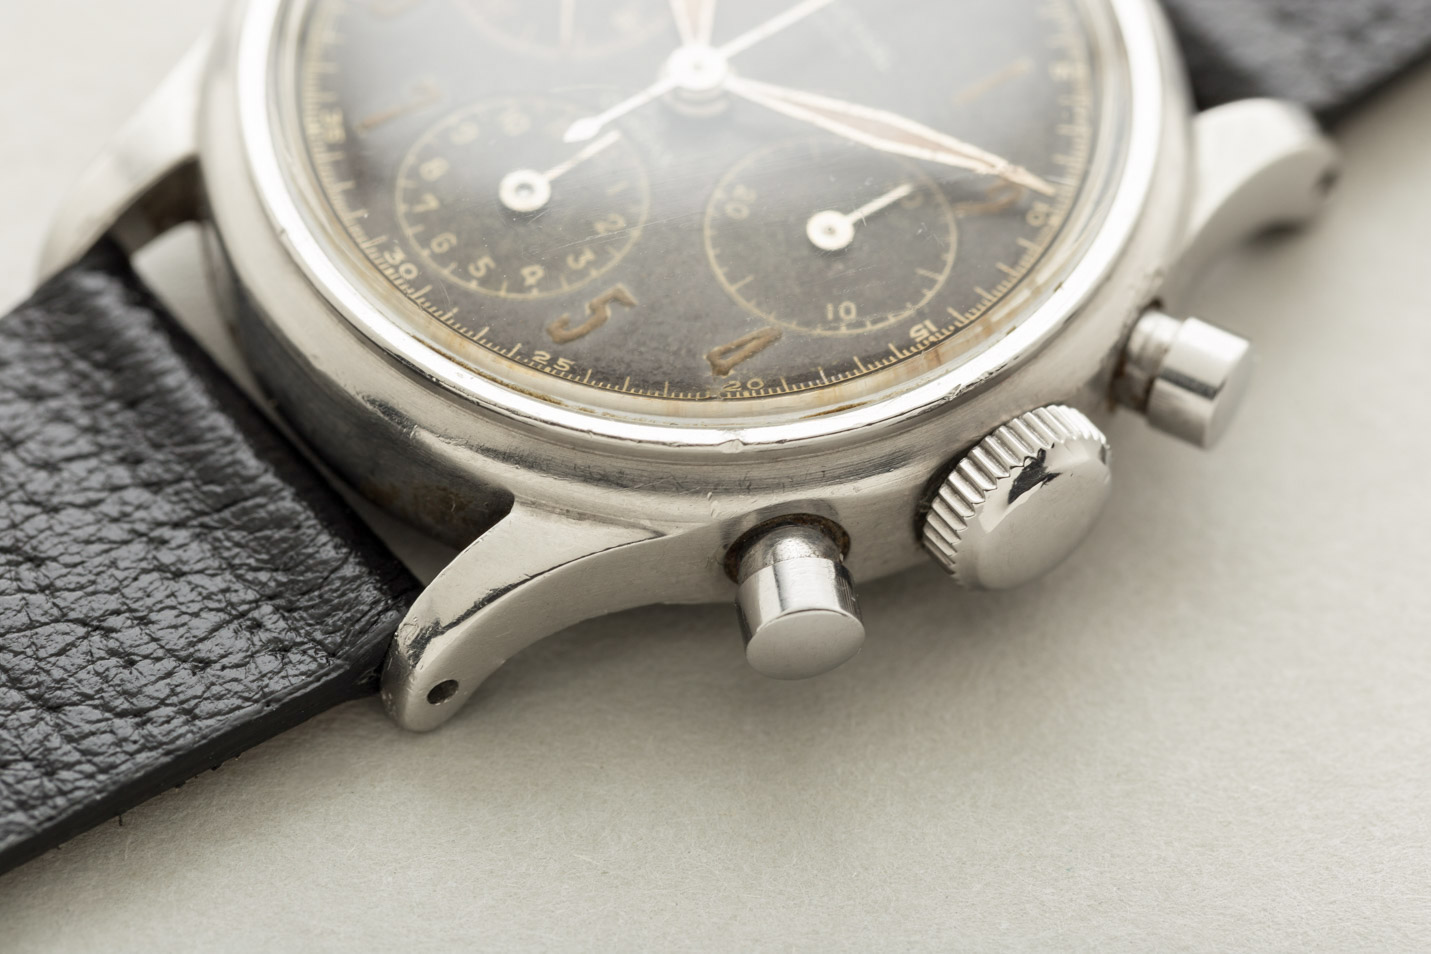 Universal Genève Compax Chronograph 22213 - Shuck the Oyster Vintage ...